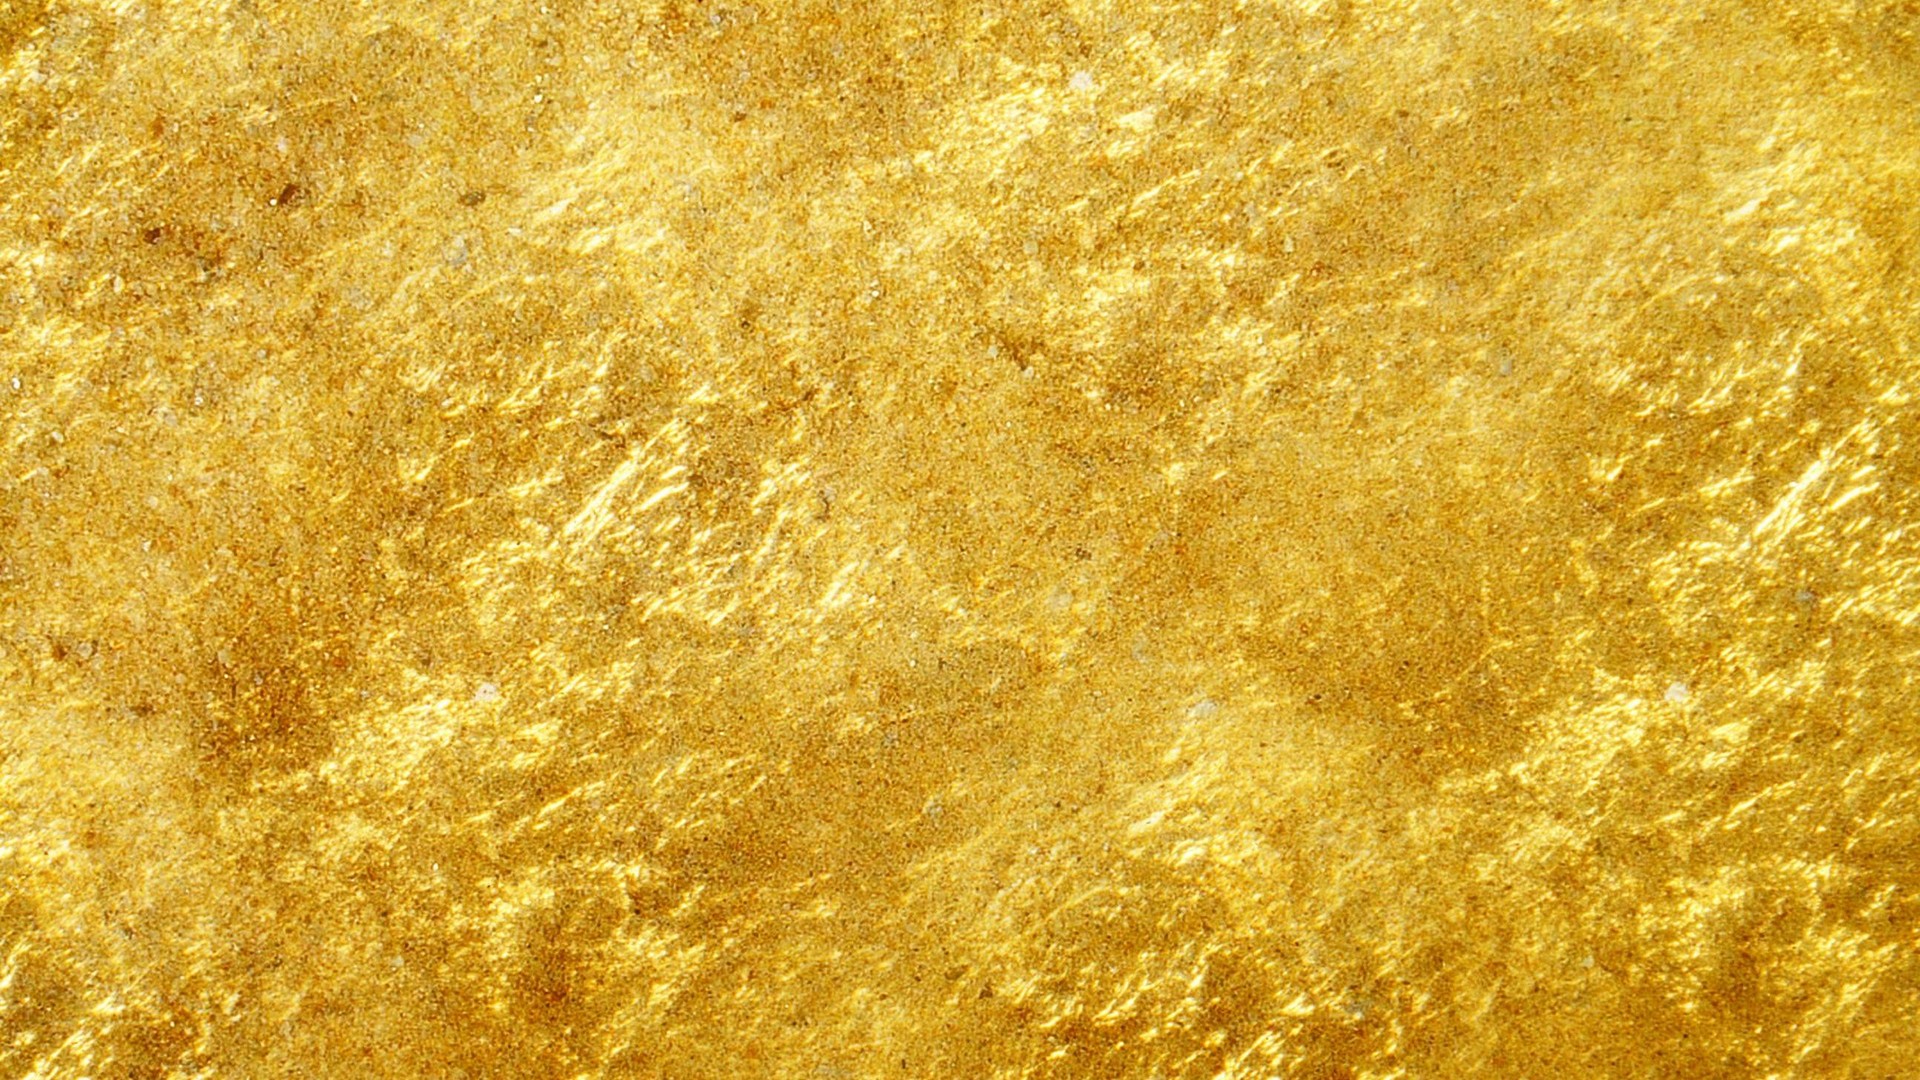 Golden HD Backgrounds With Resolution 1920X1080